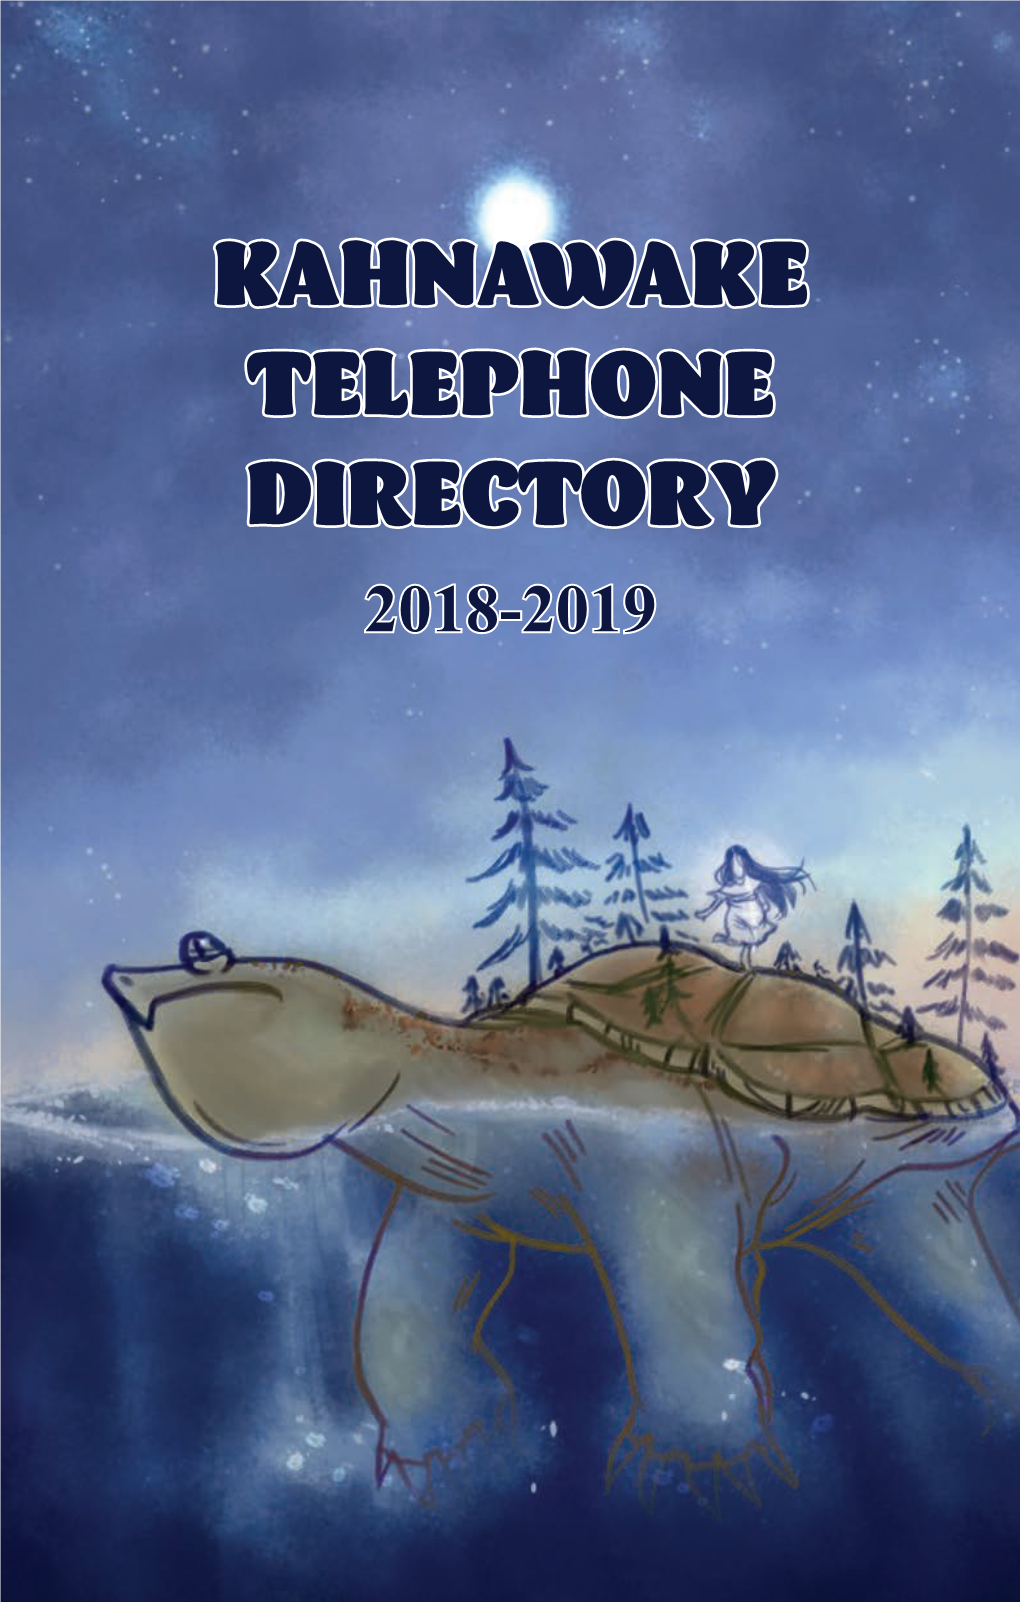 KAHNAWAKE TELEPHONE DIRECTORY 2018-2019 Home of the World’S Greatest Spareribs and Chicken!